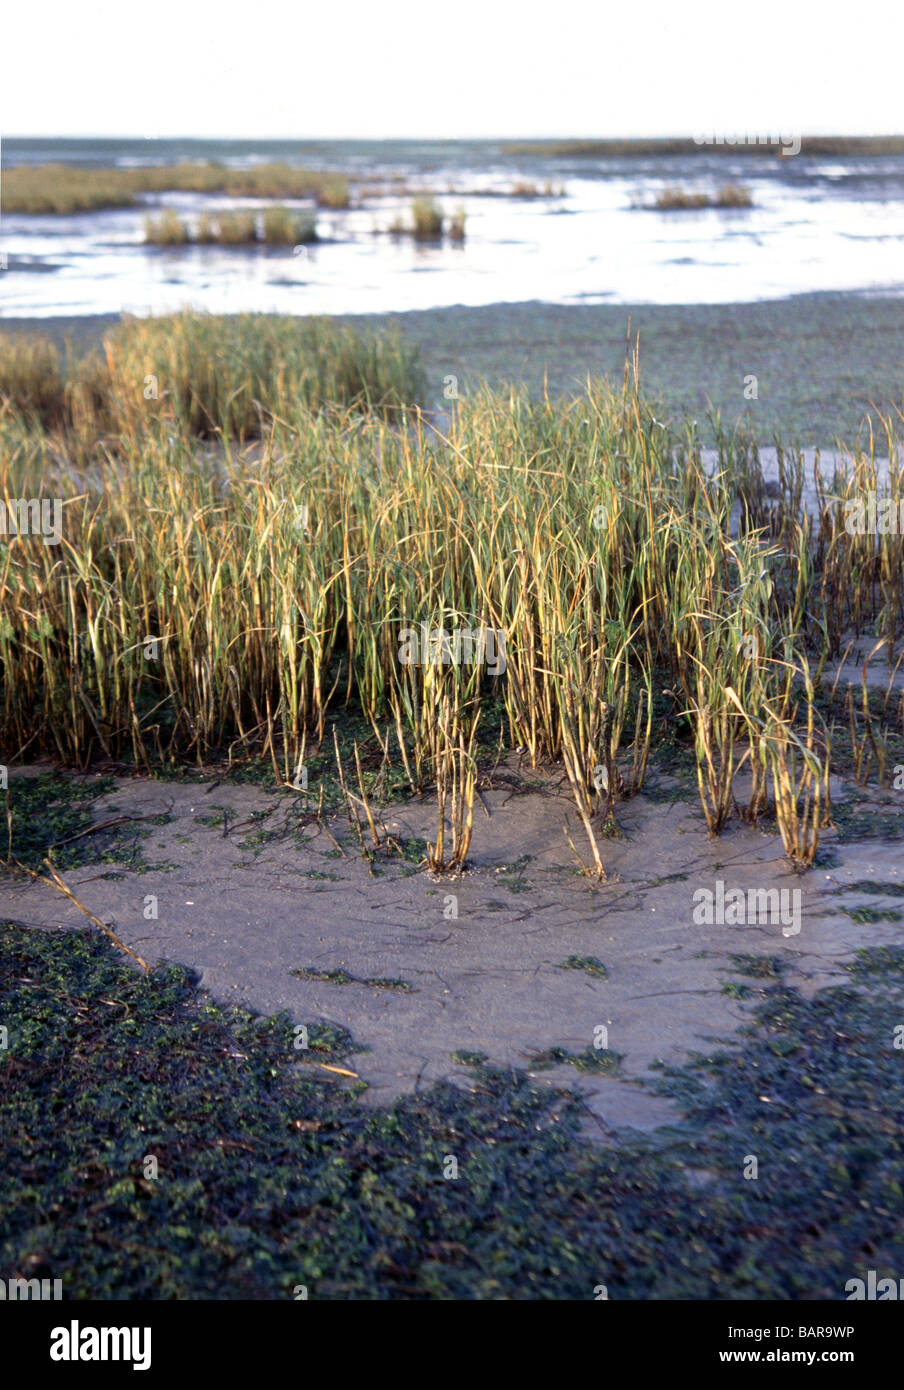 Spartina townsendii building up mud around it to start the formation of a new sand dune or salt-marsh. Stock Photo